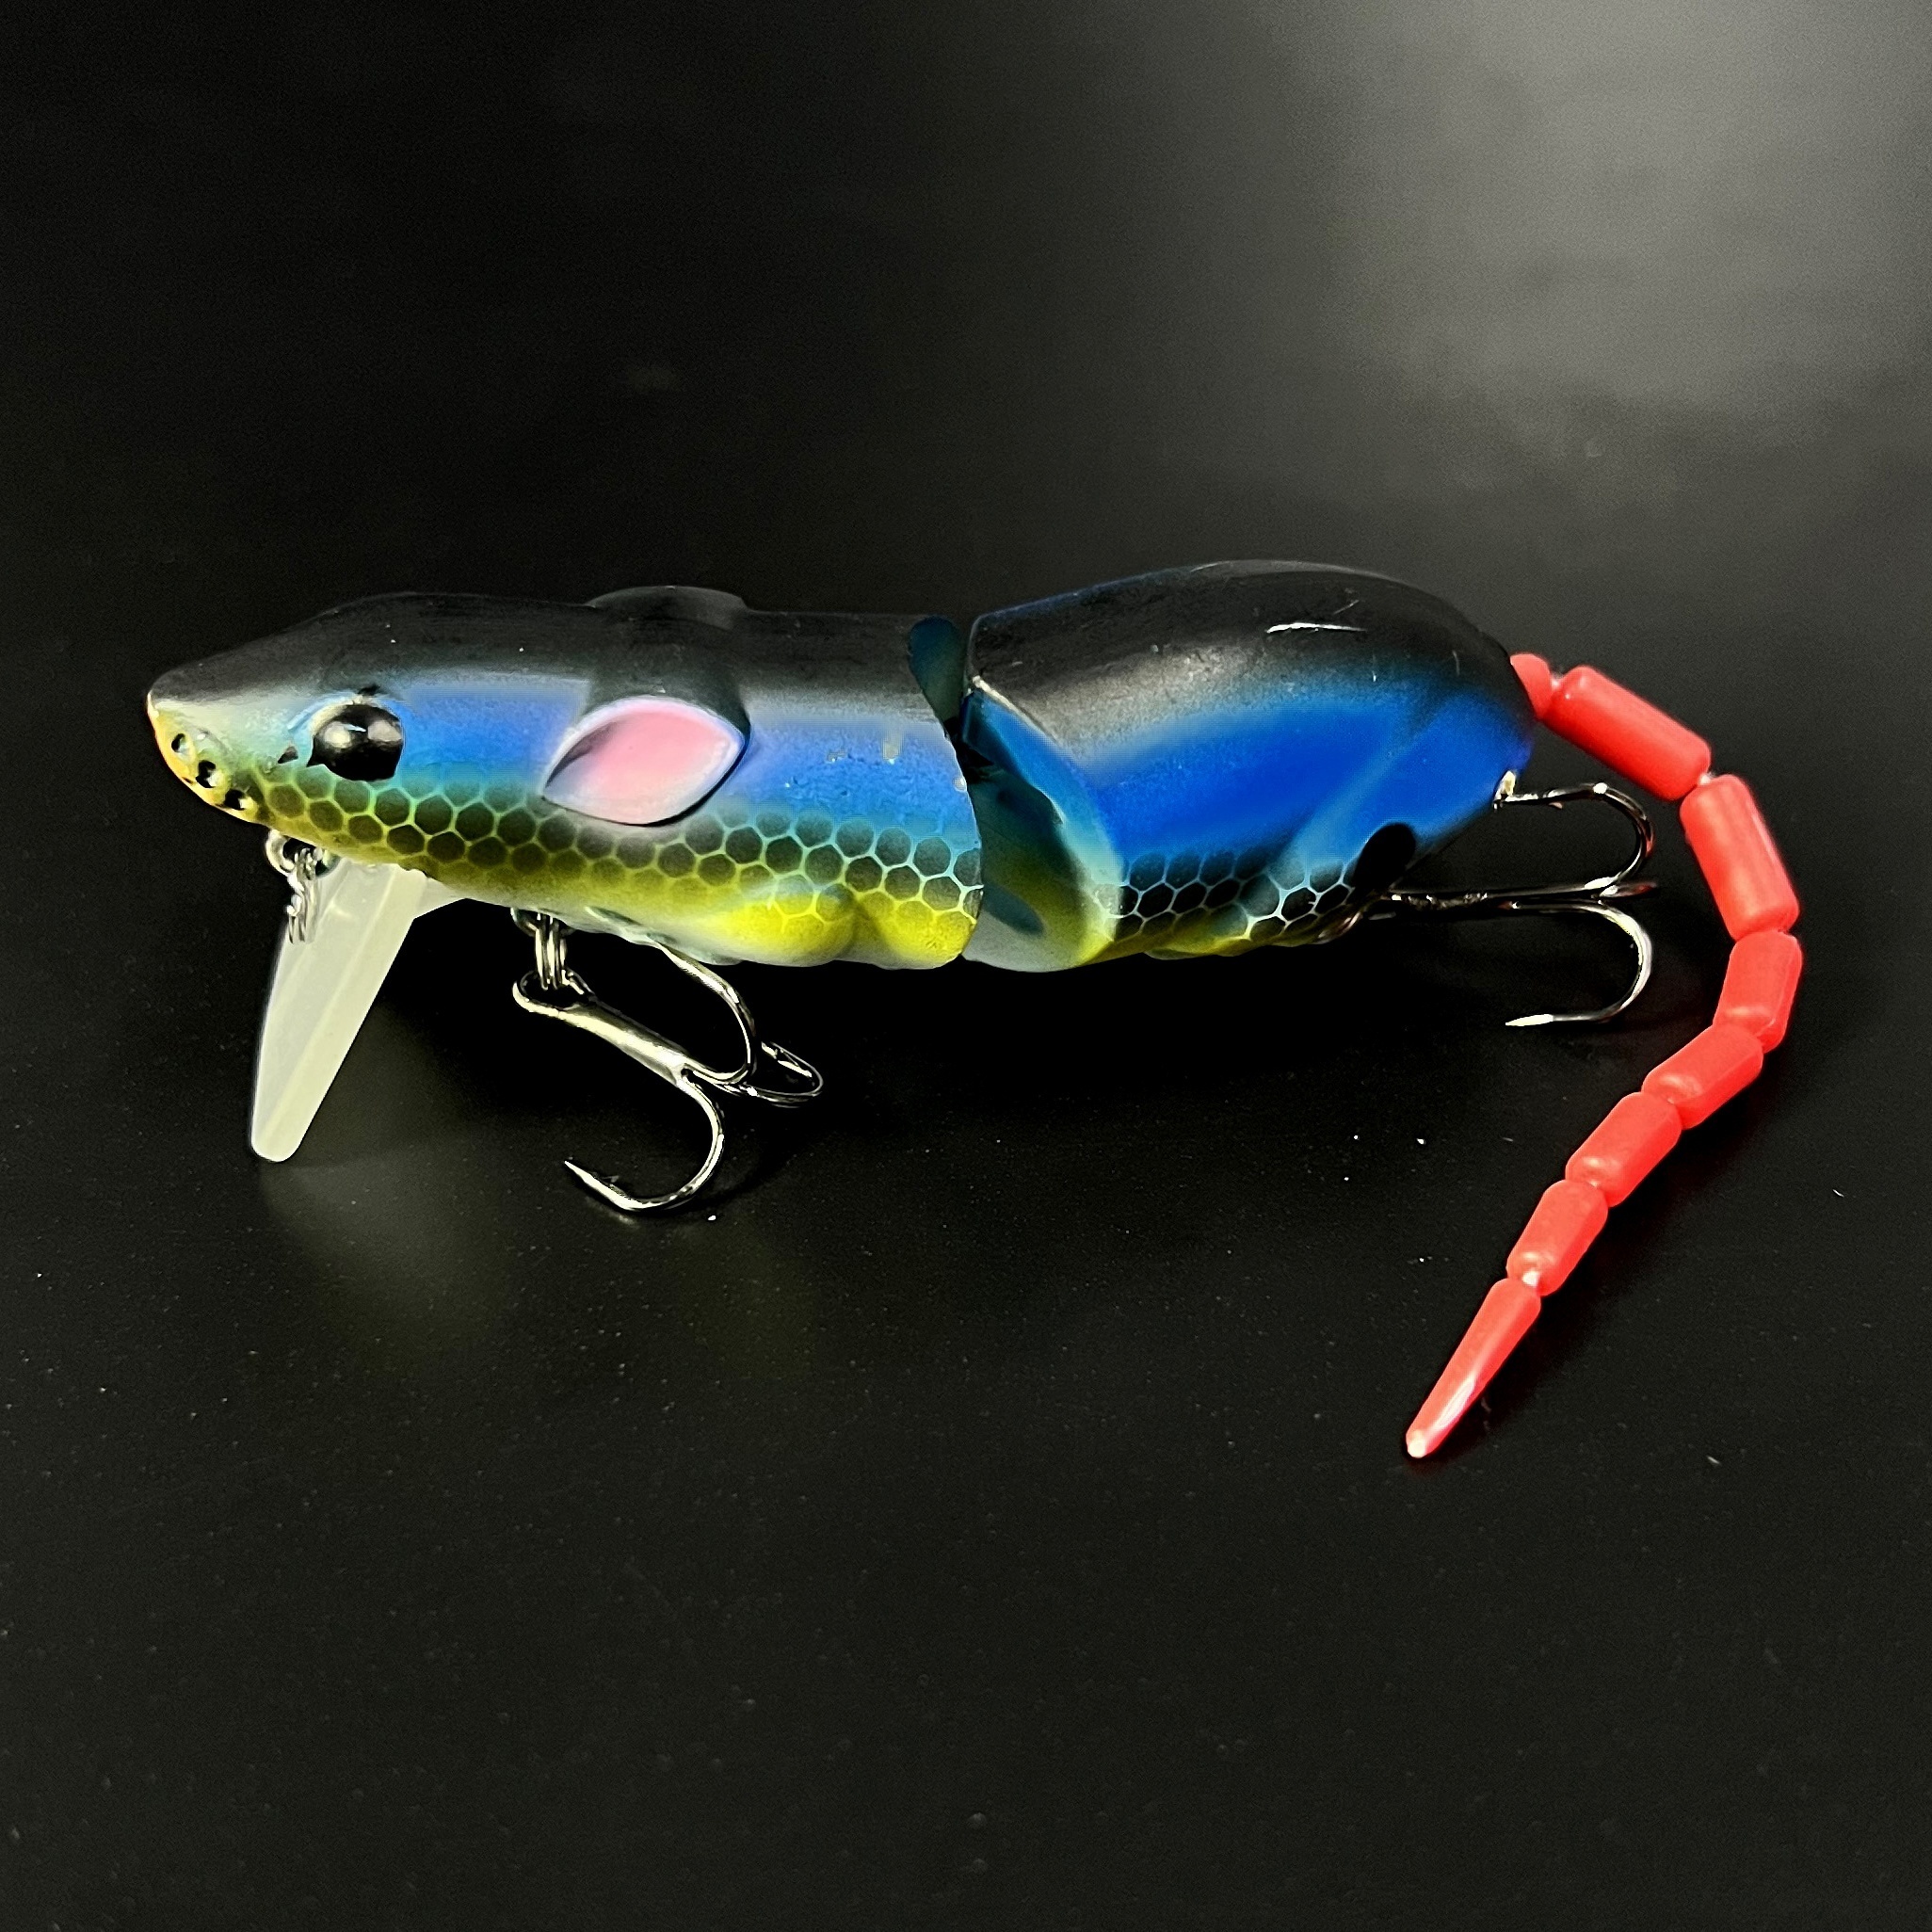 Fishing Tool Accessories, Mouse Rat Shape Bait, Mouse Fishing Lure